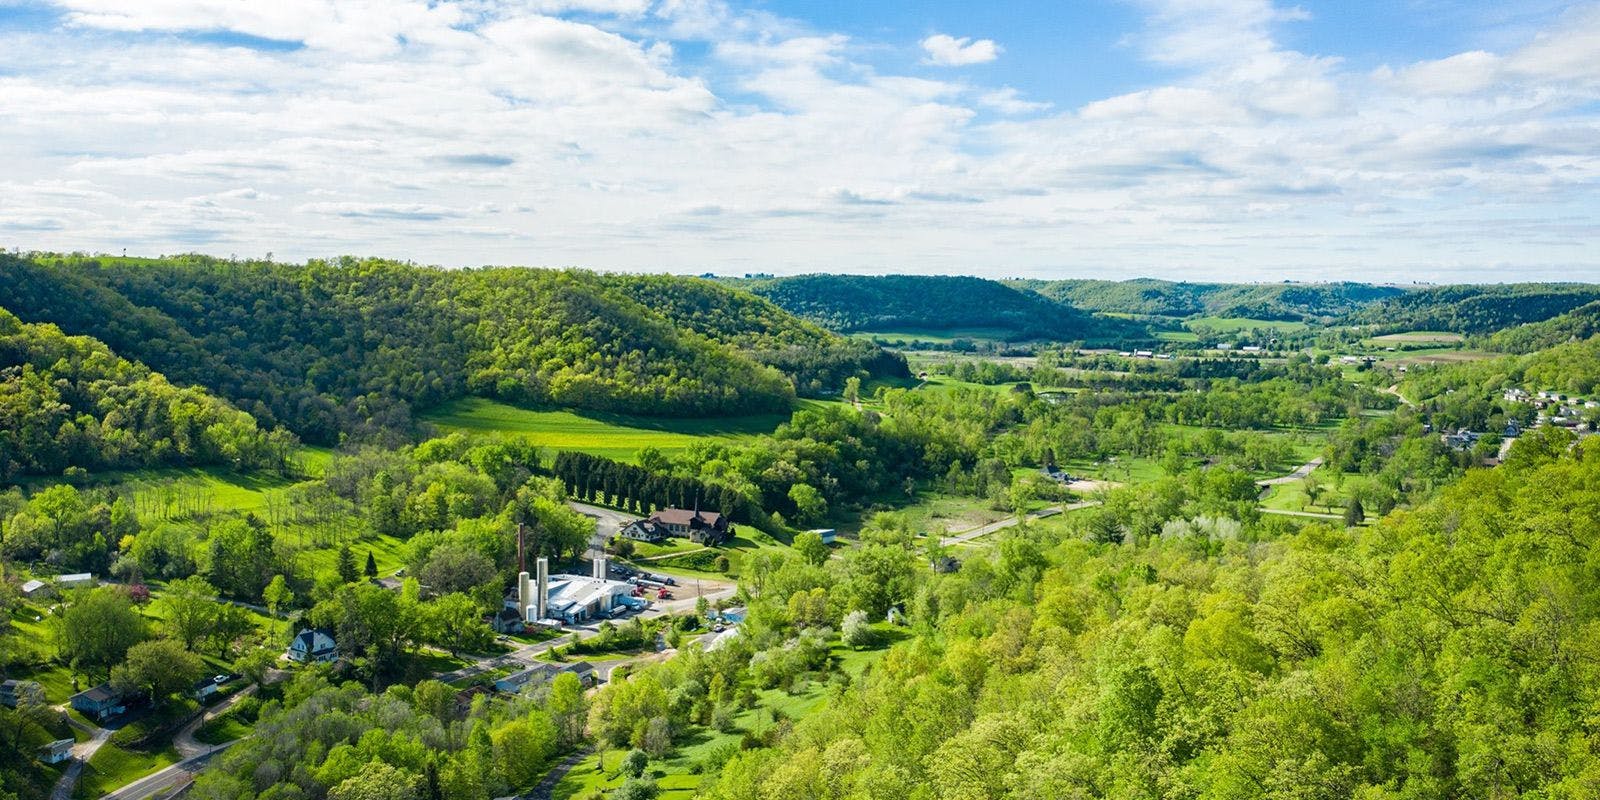 Aerial view of Chaseburg creamery nestled in a valley of the Driftless region of Wisconsin.